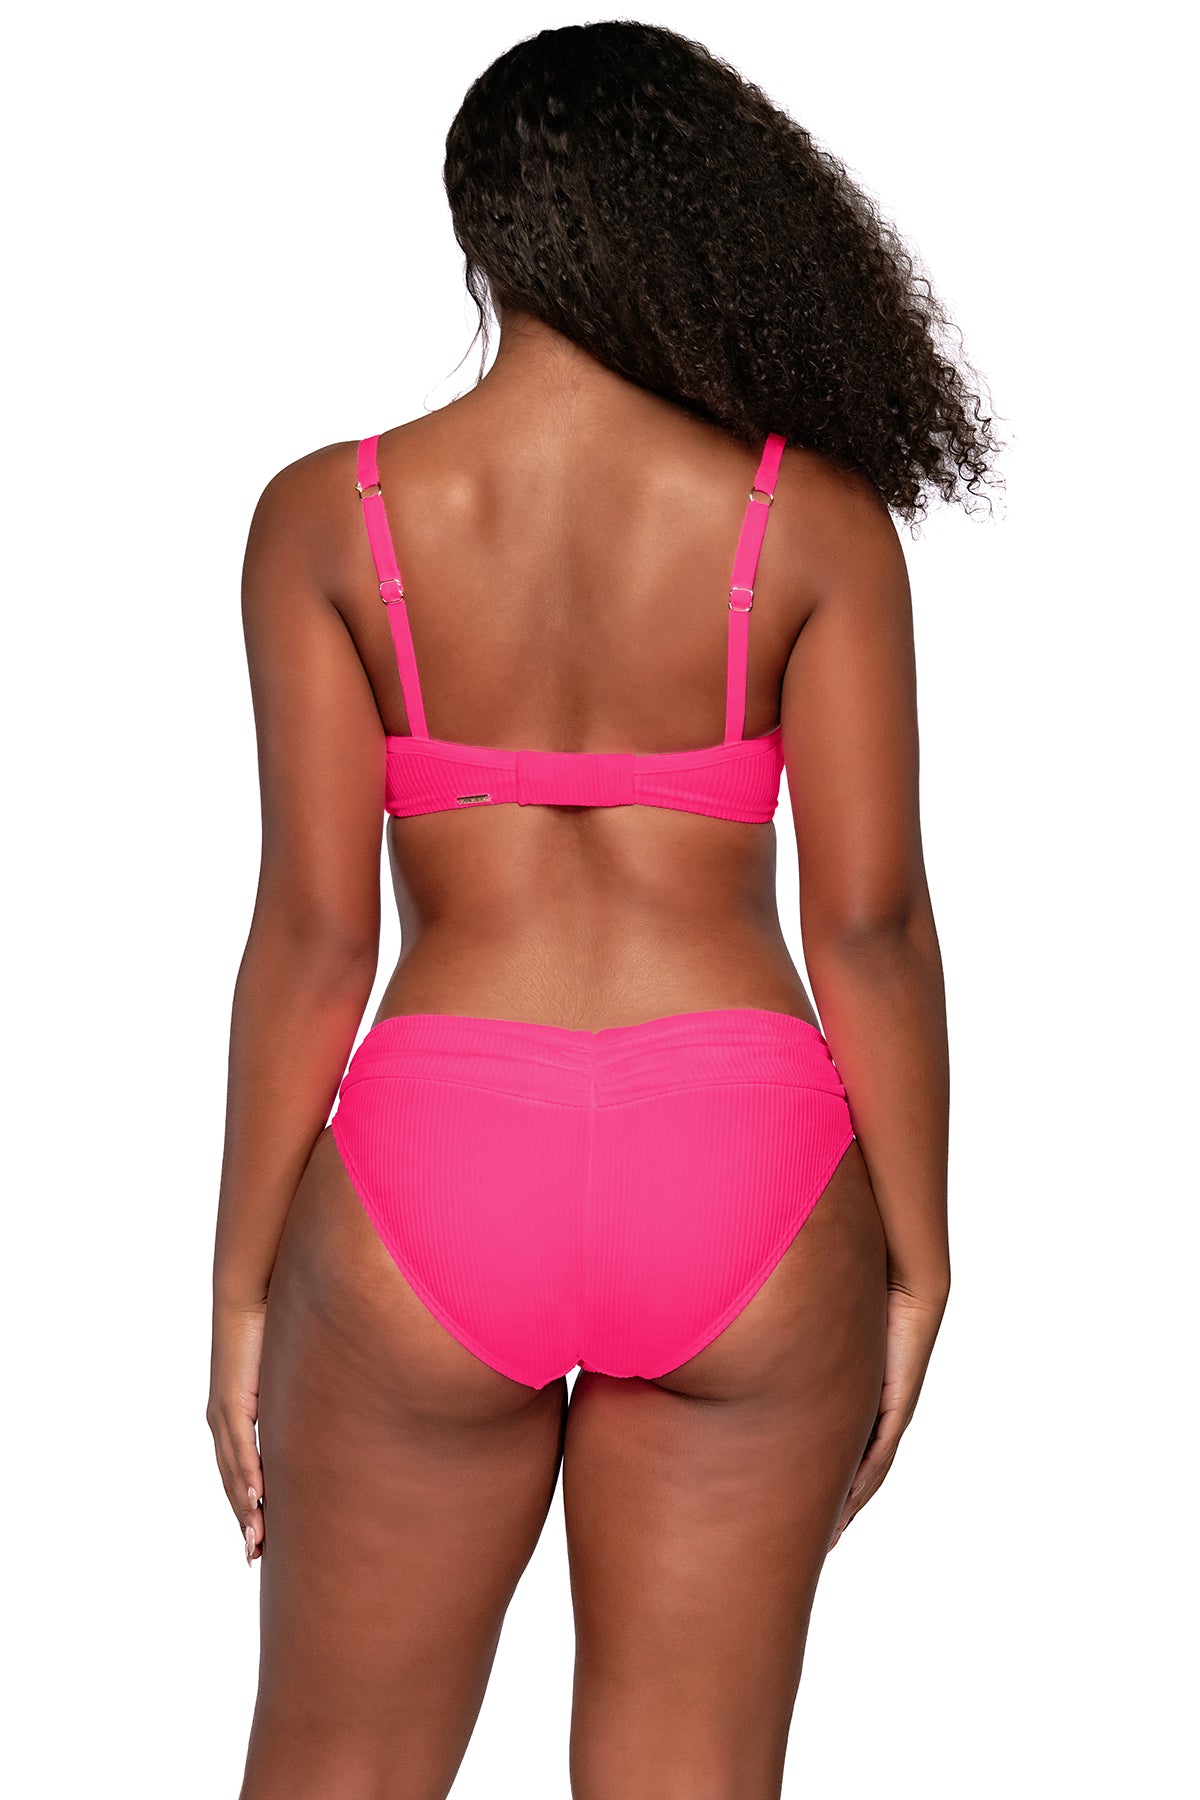 Back view of Sunsets Neon Pink Crossroads Underwire Top
